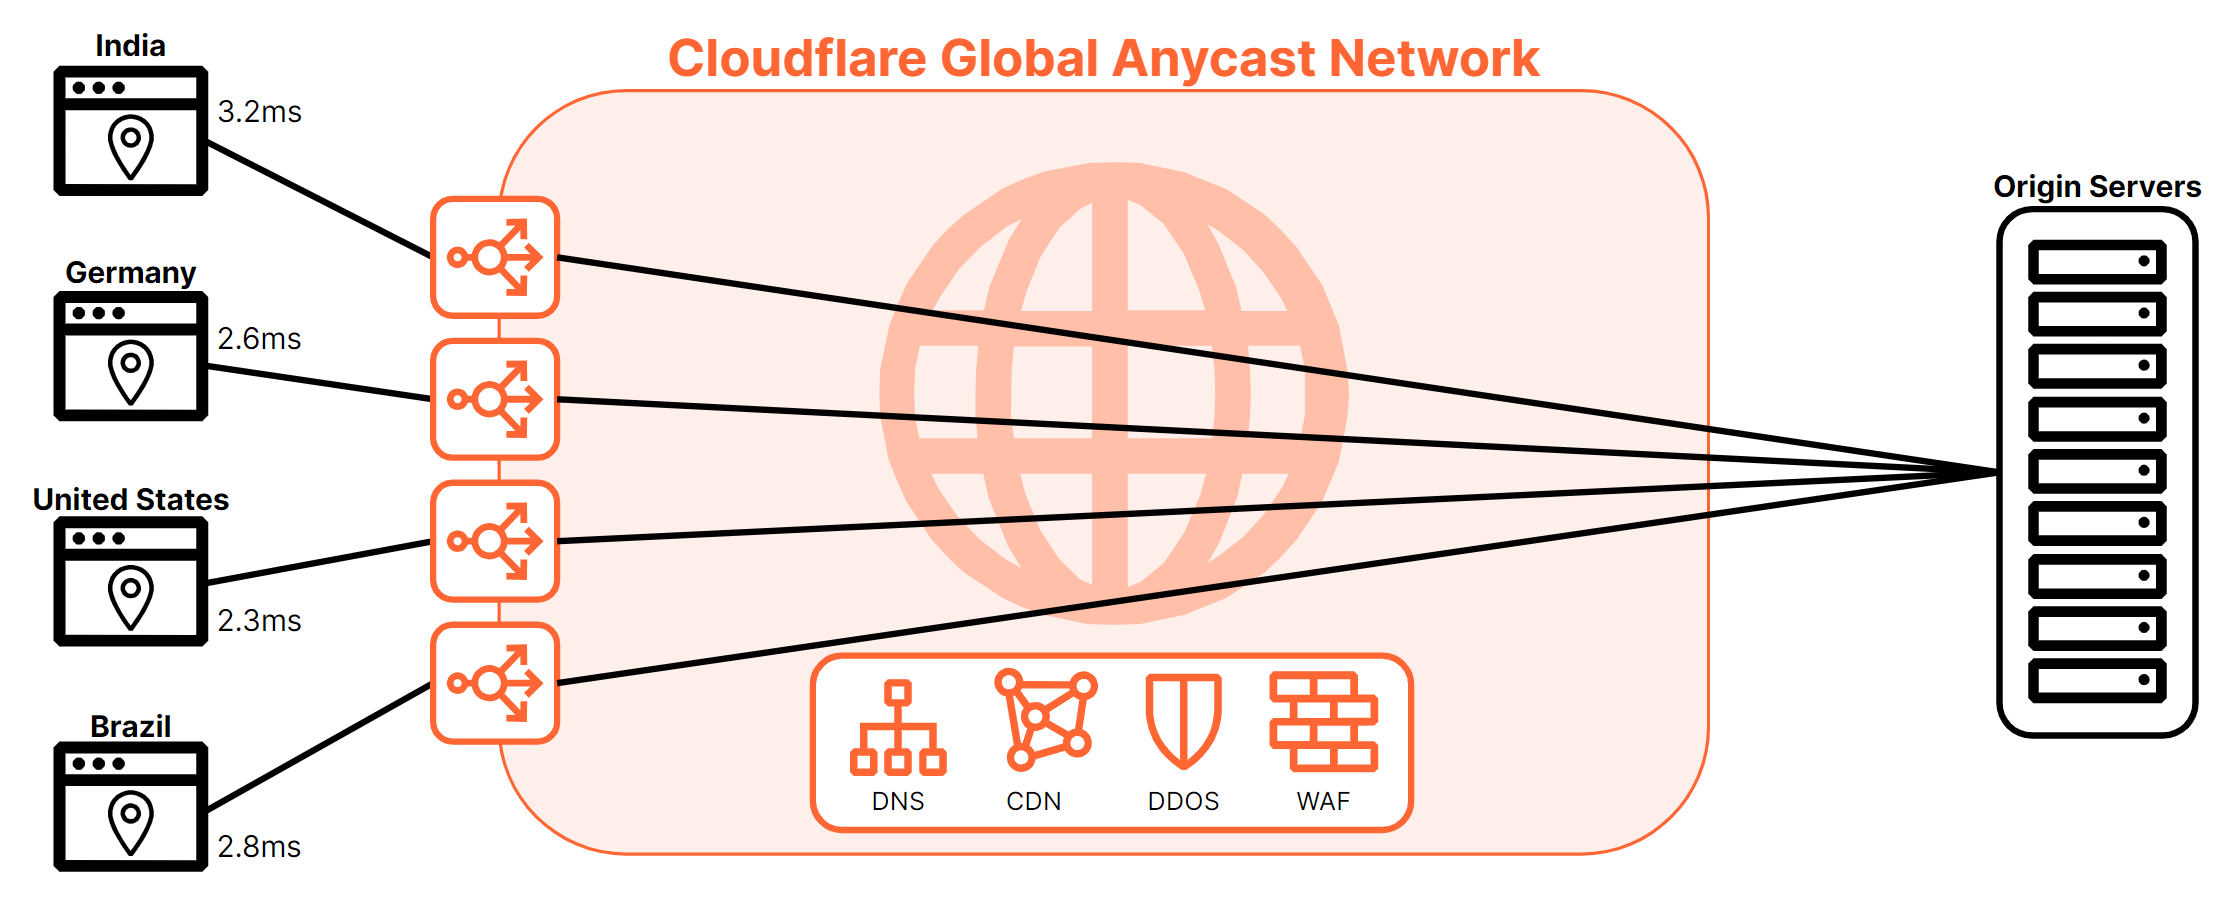 Cloudflare’s global Anycast network ensures that the closest data center is always selected